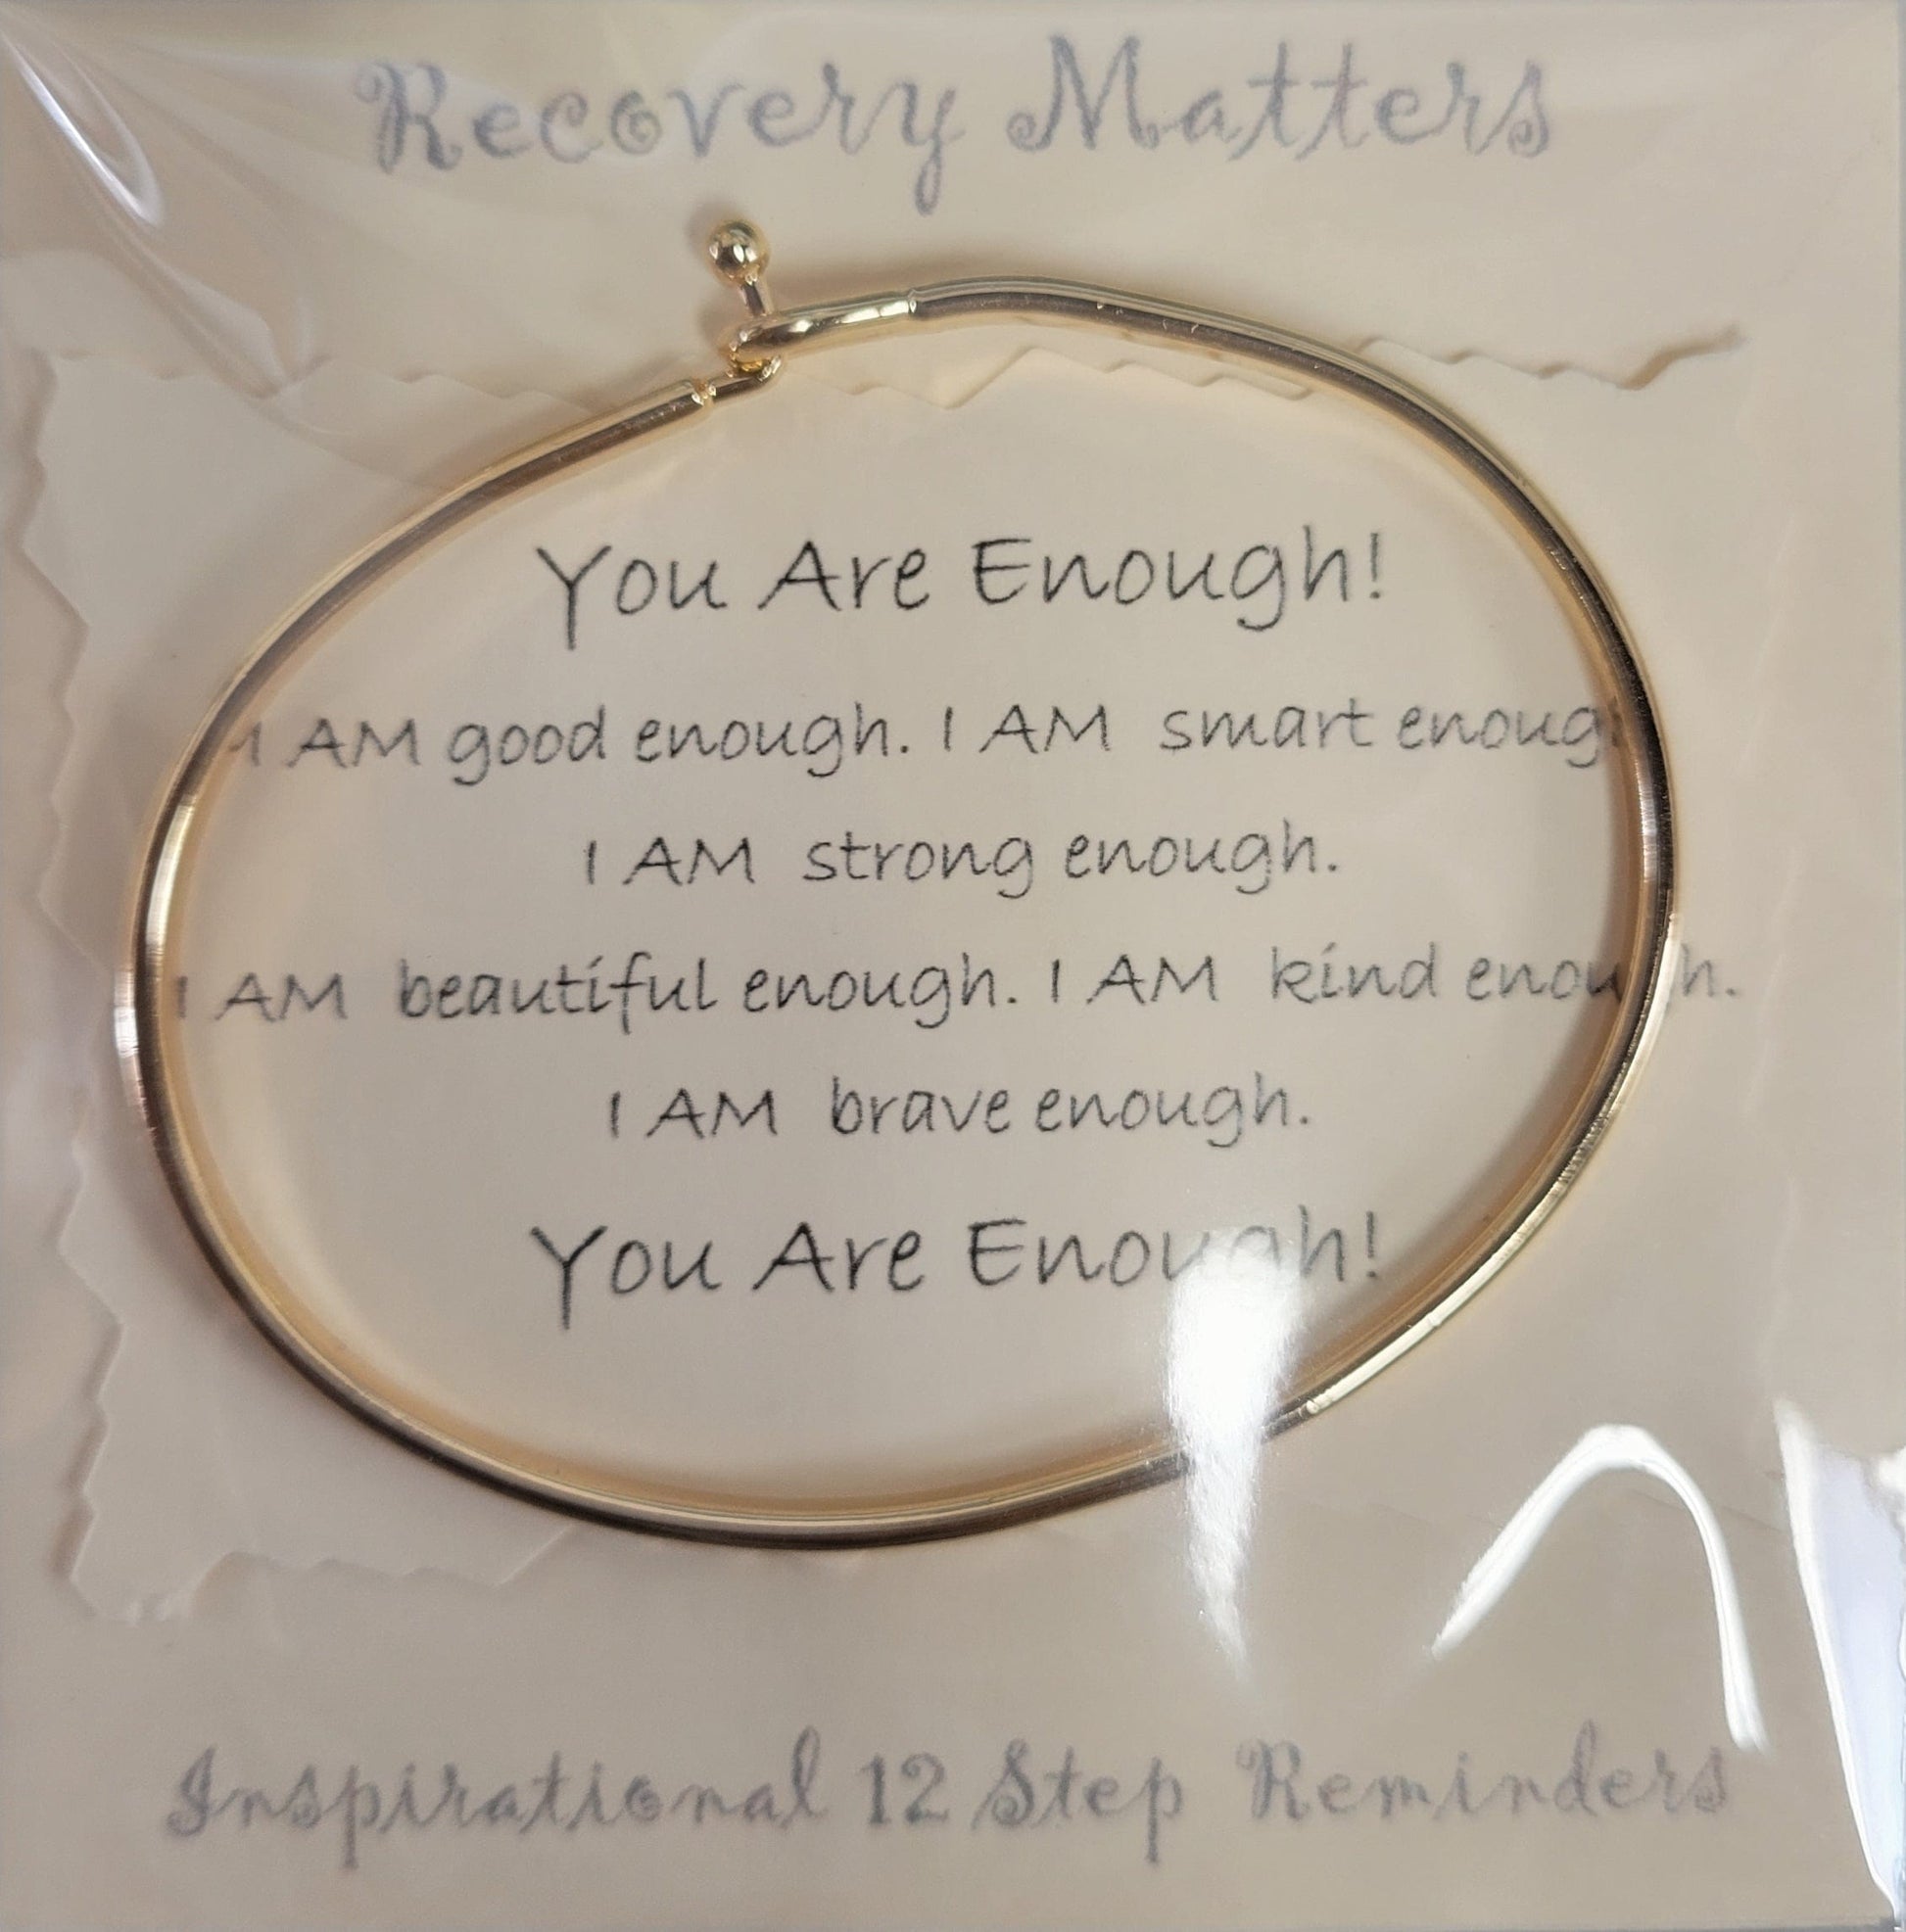 "You Are Enough!" Bracelet By Recovery Matters Gold